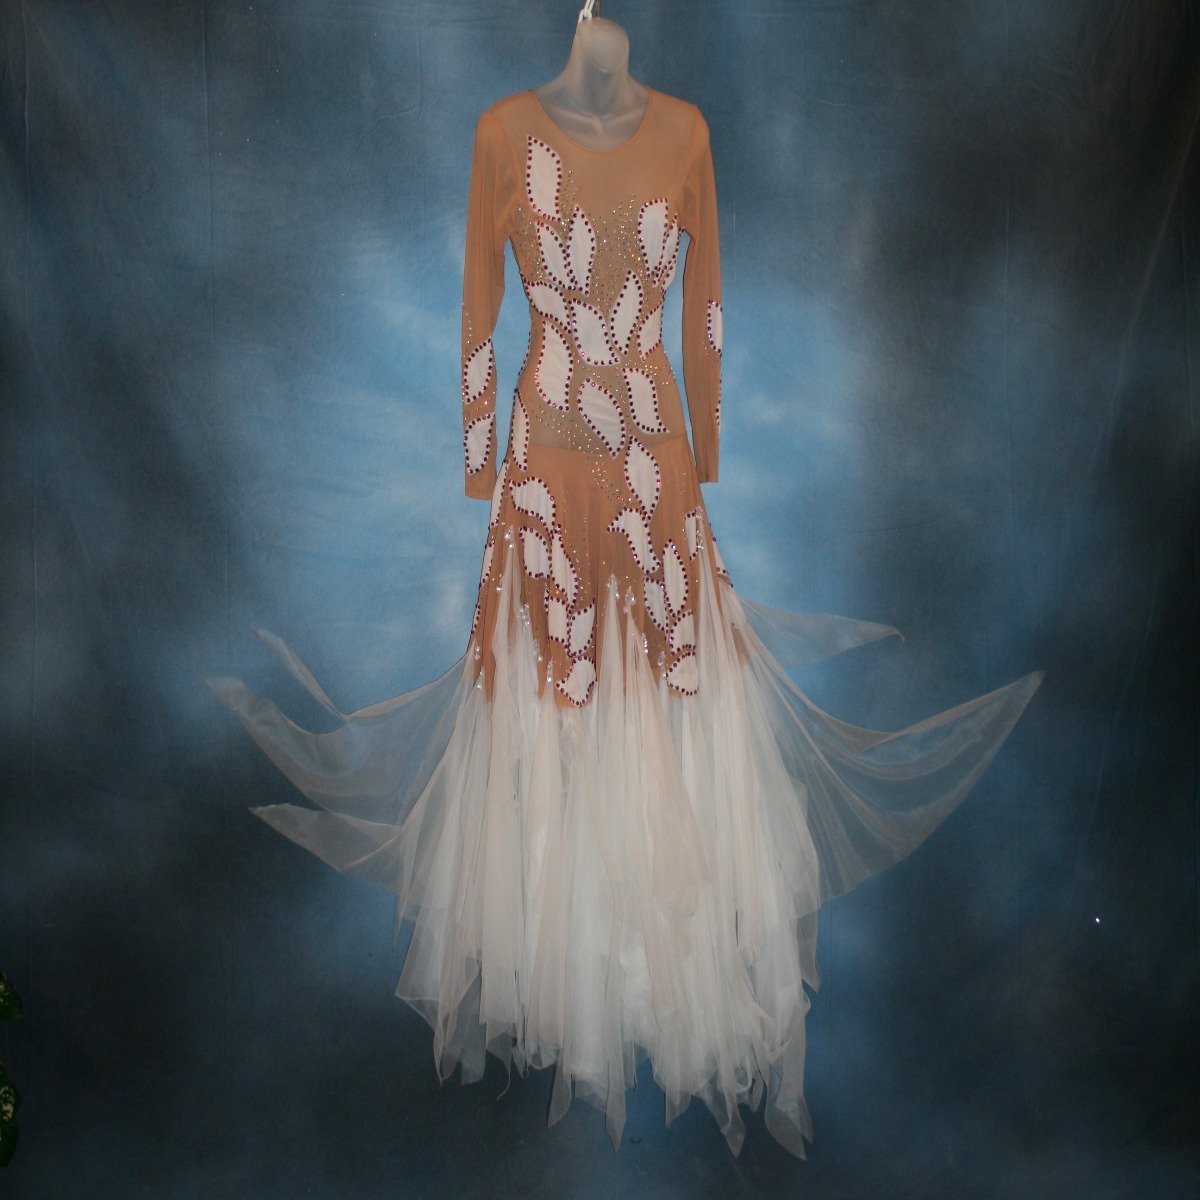 Crystal's Creations white ballroom dress created of white hand cut petals arranged on a nude illusion base with white tricot chiffon skirting, embellished with CAB & fuchsia Swarovski rhinestone work